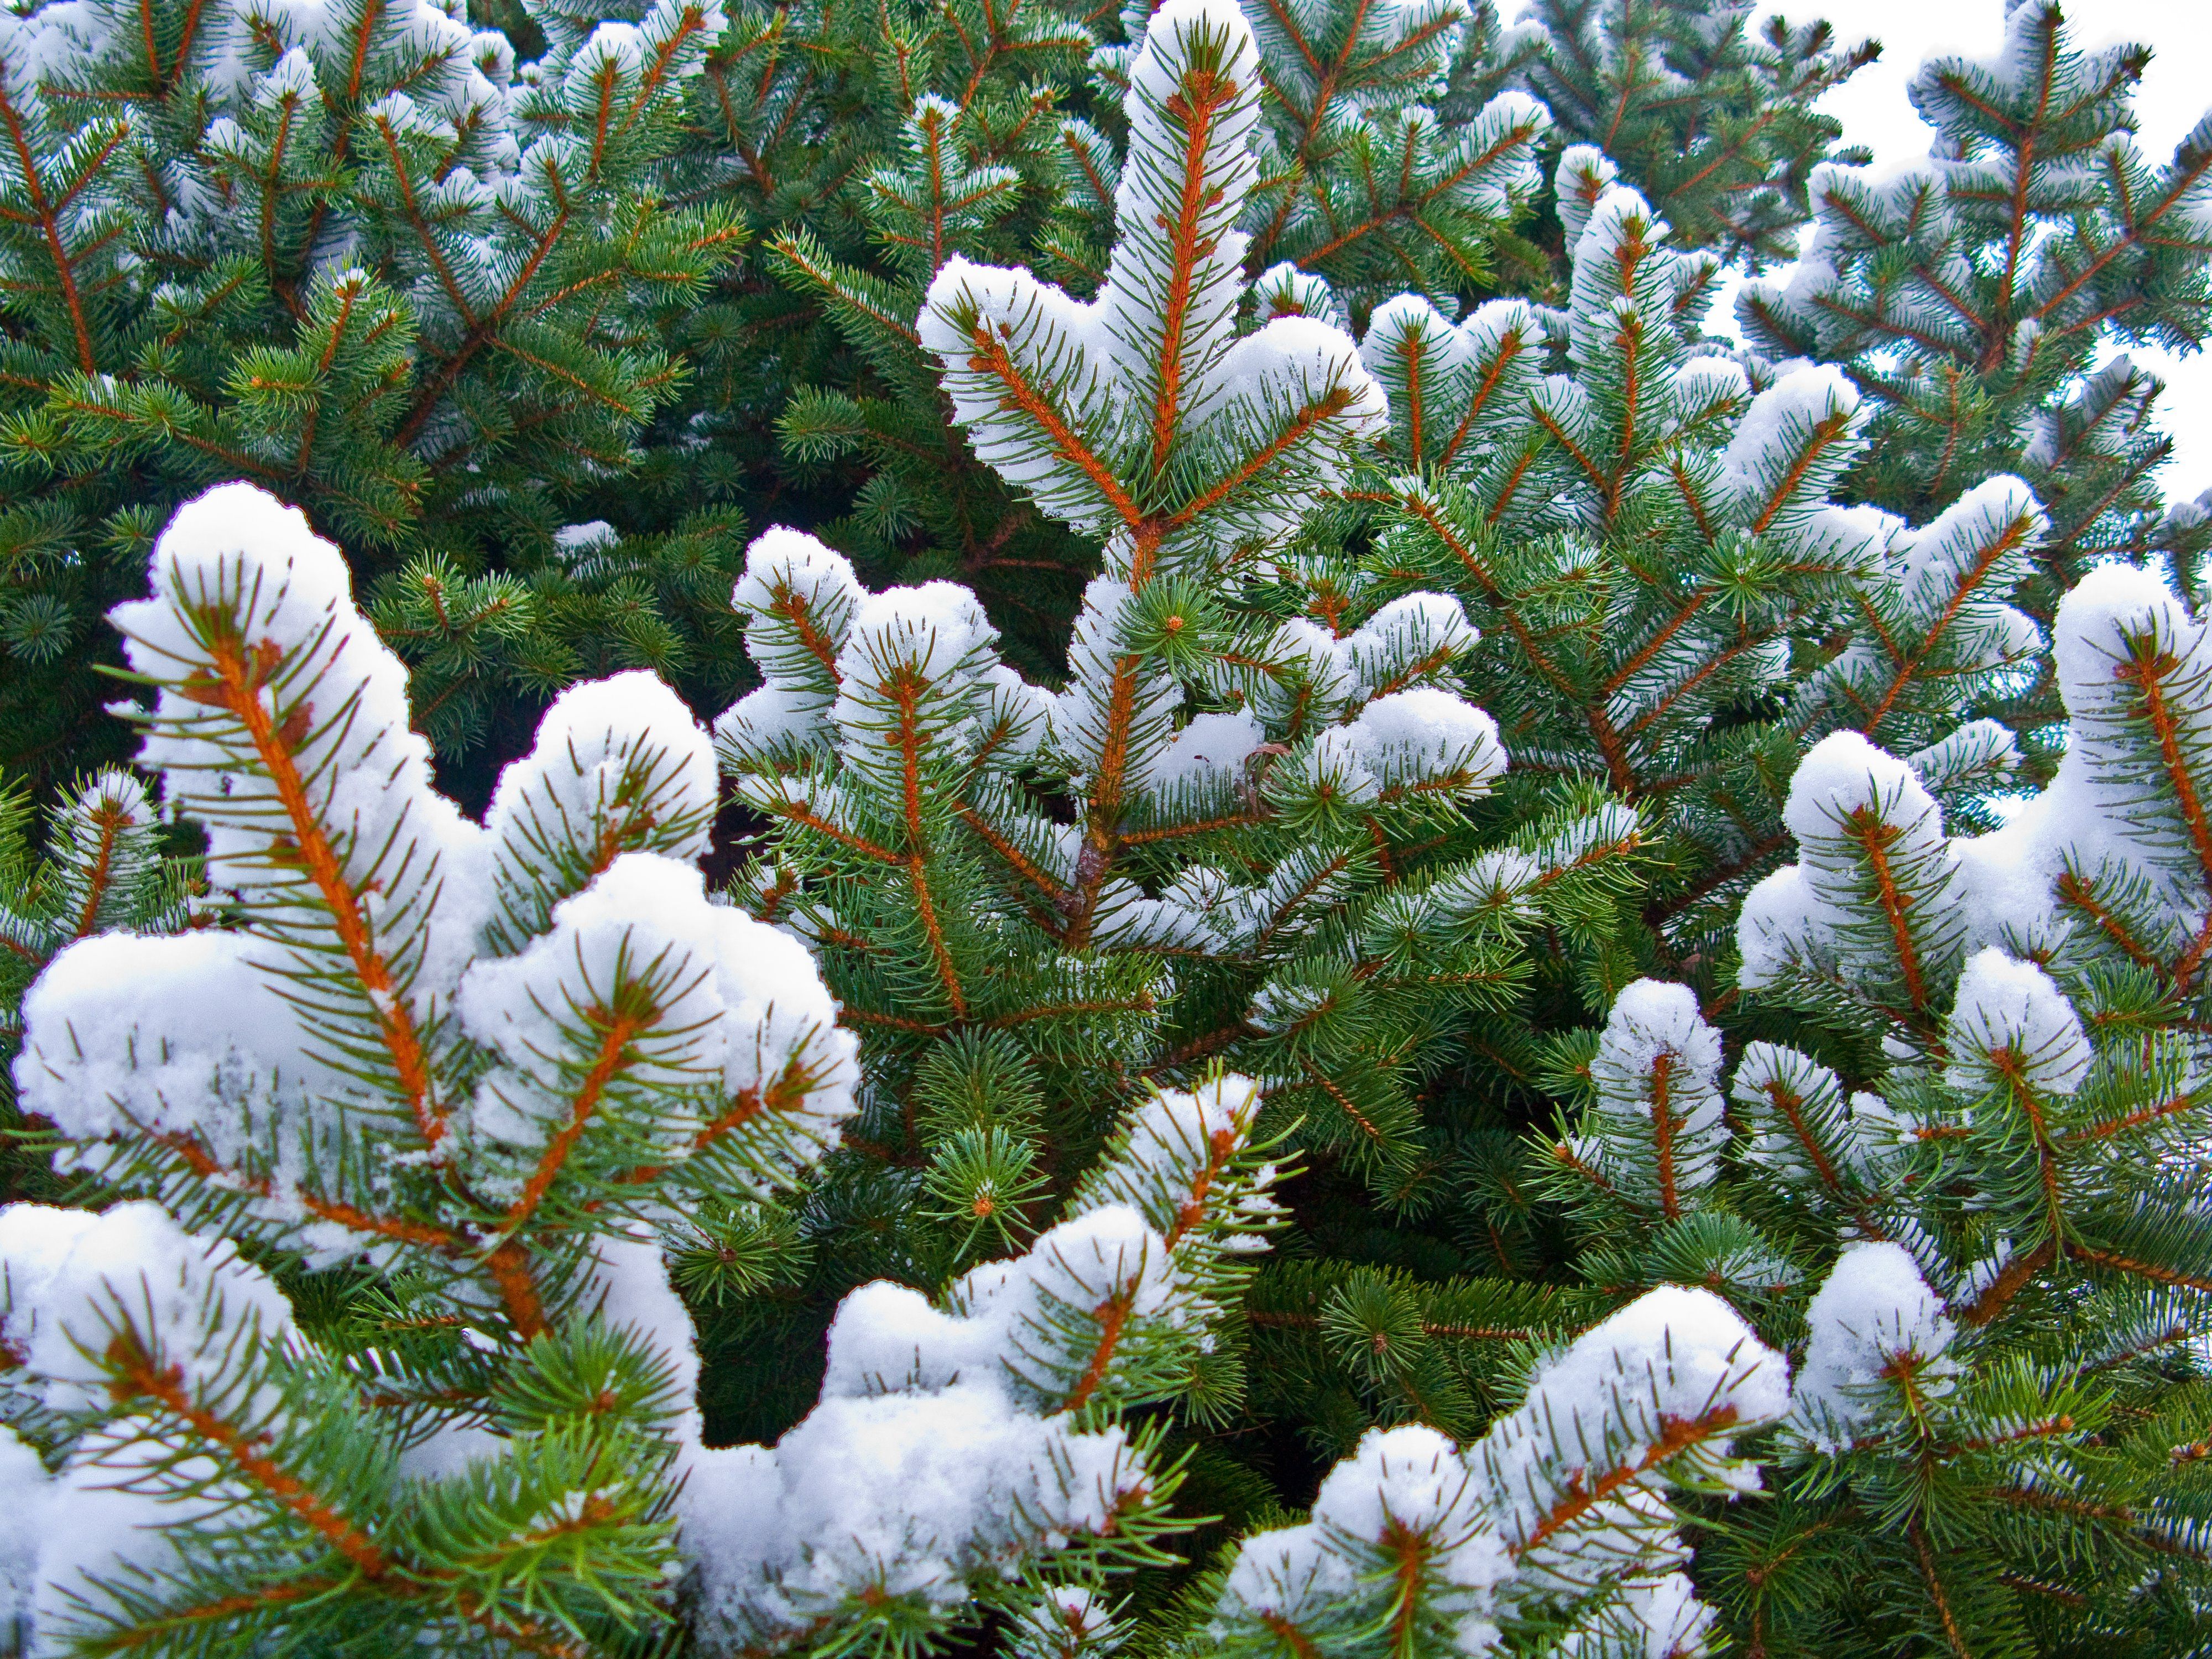 Blue Spruce Pine Tree Look For An Evergreen Day